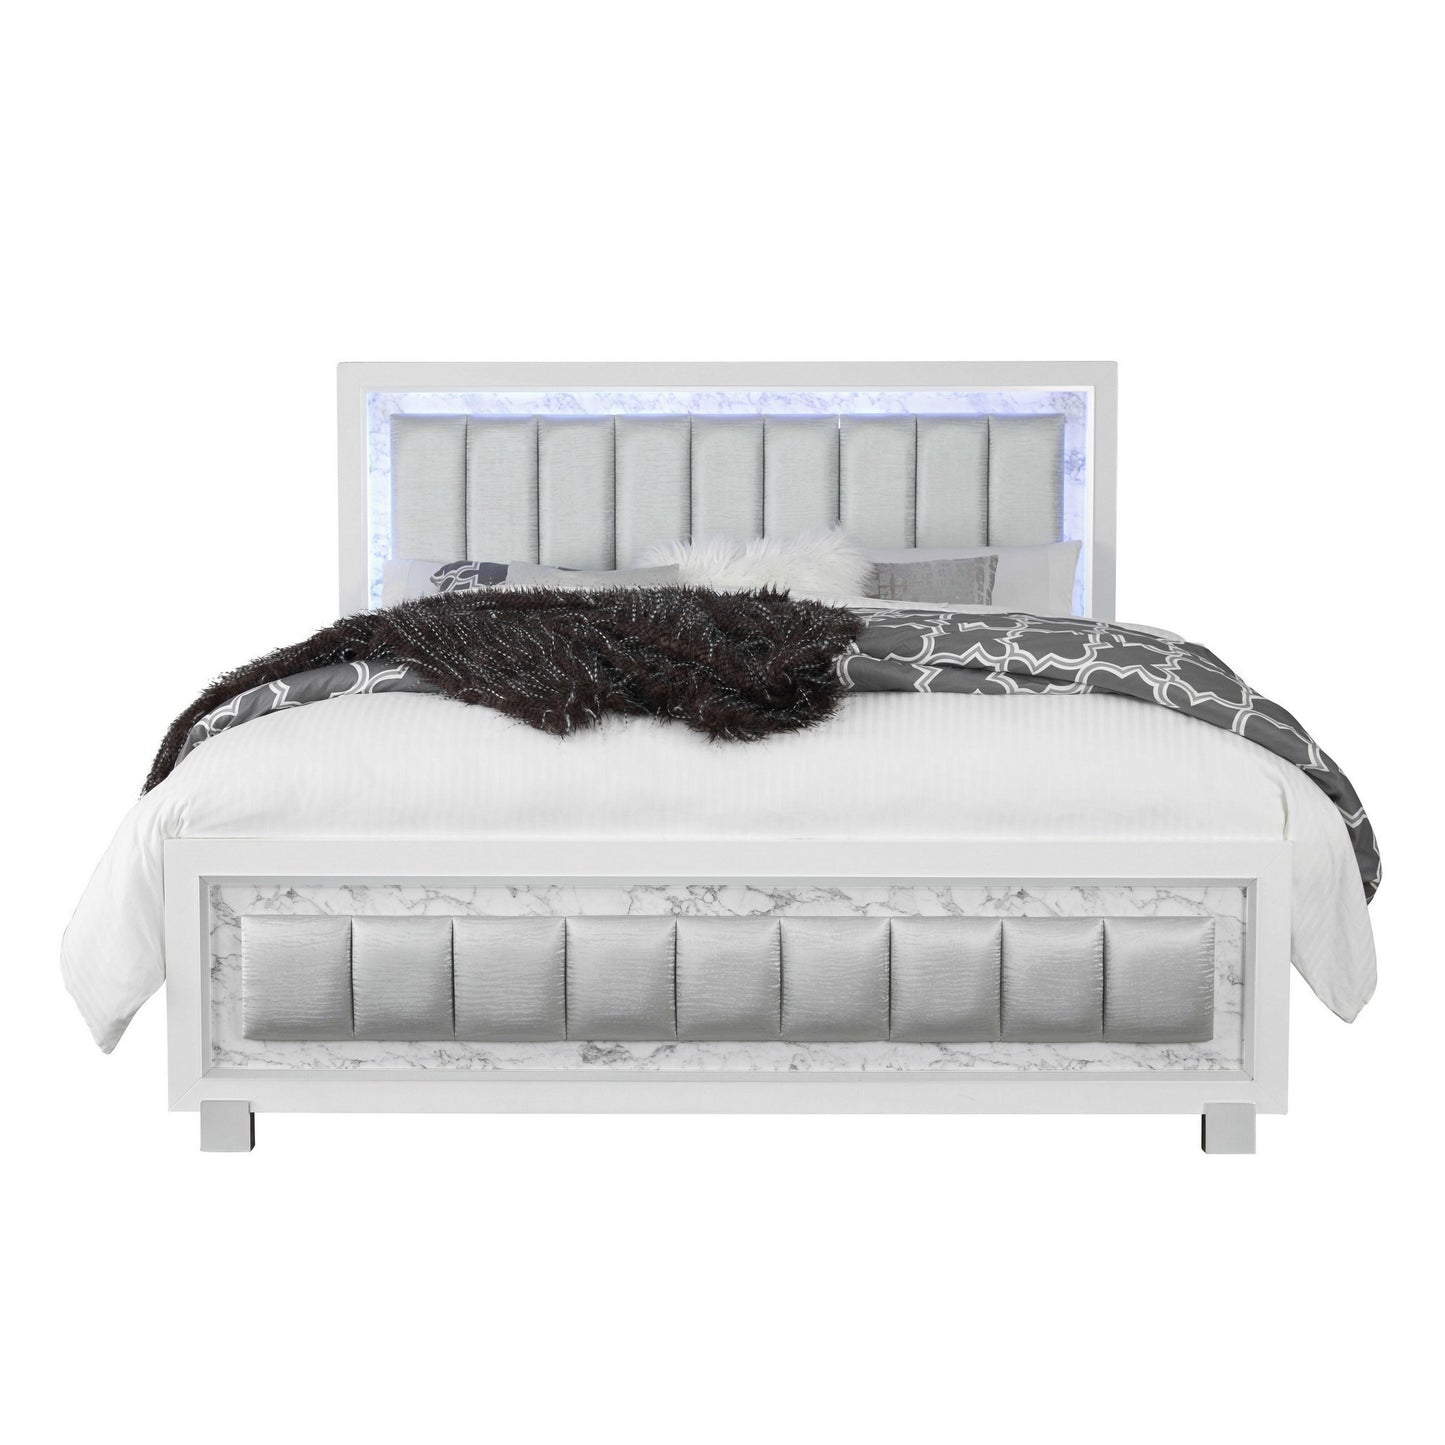 Solid Wood King White Upholstered Faux Leatherno Bed